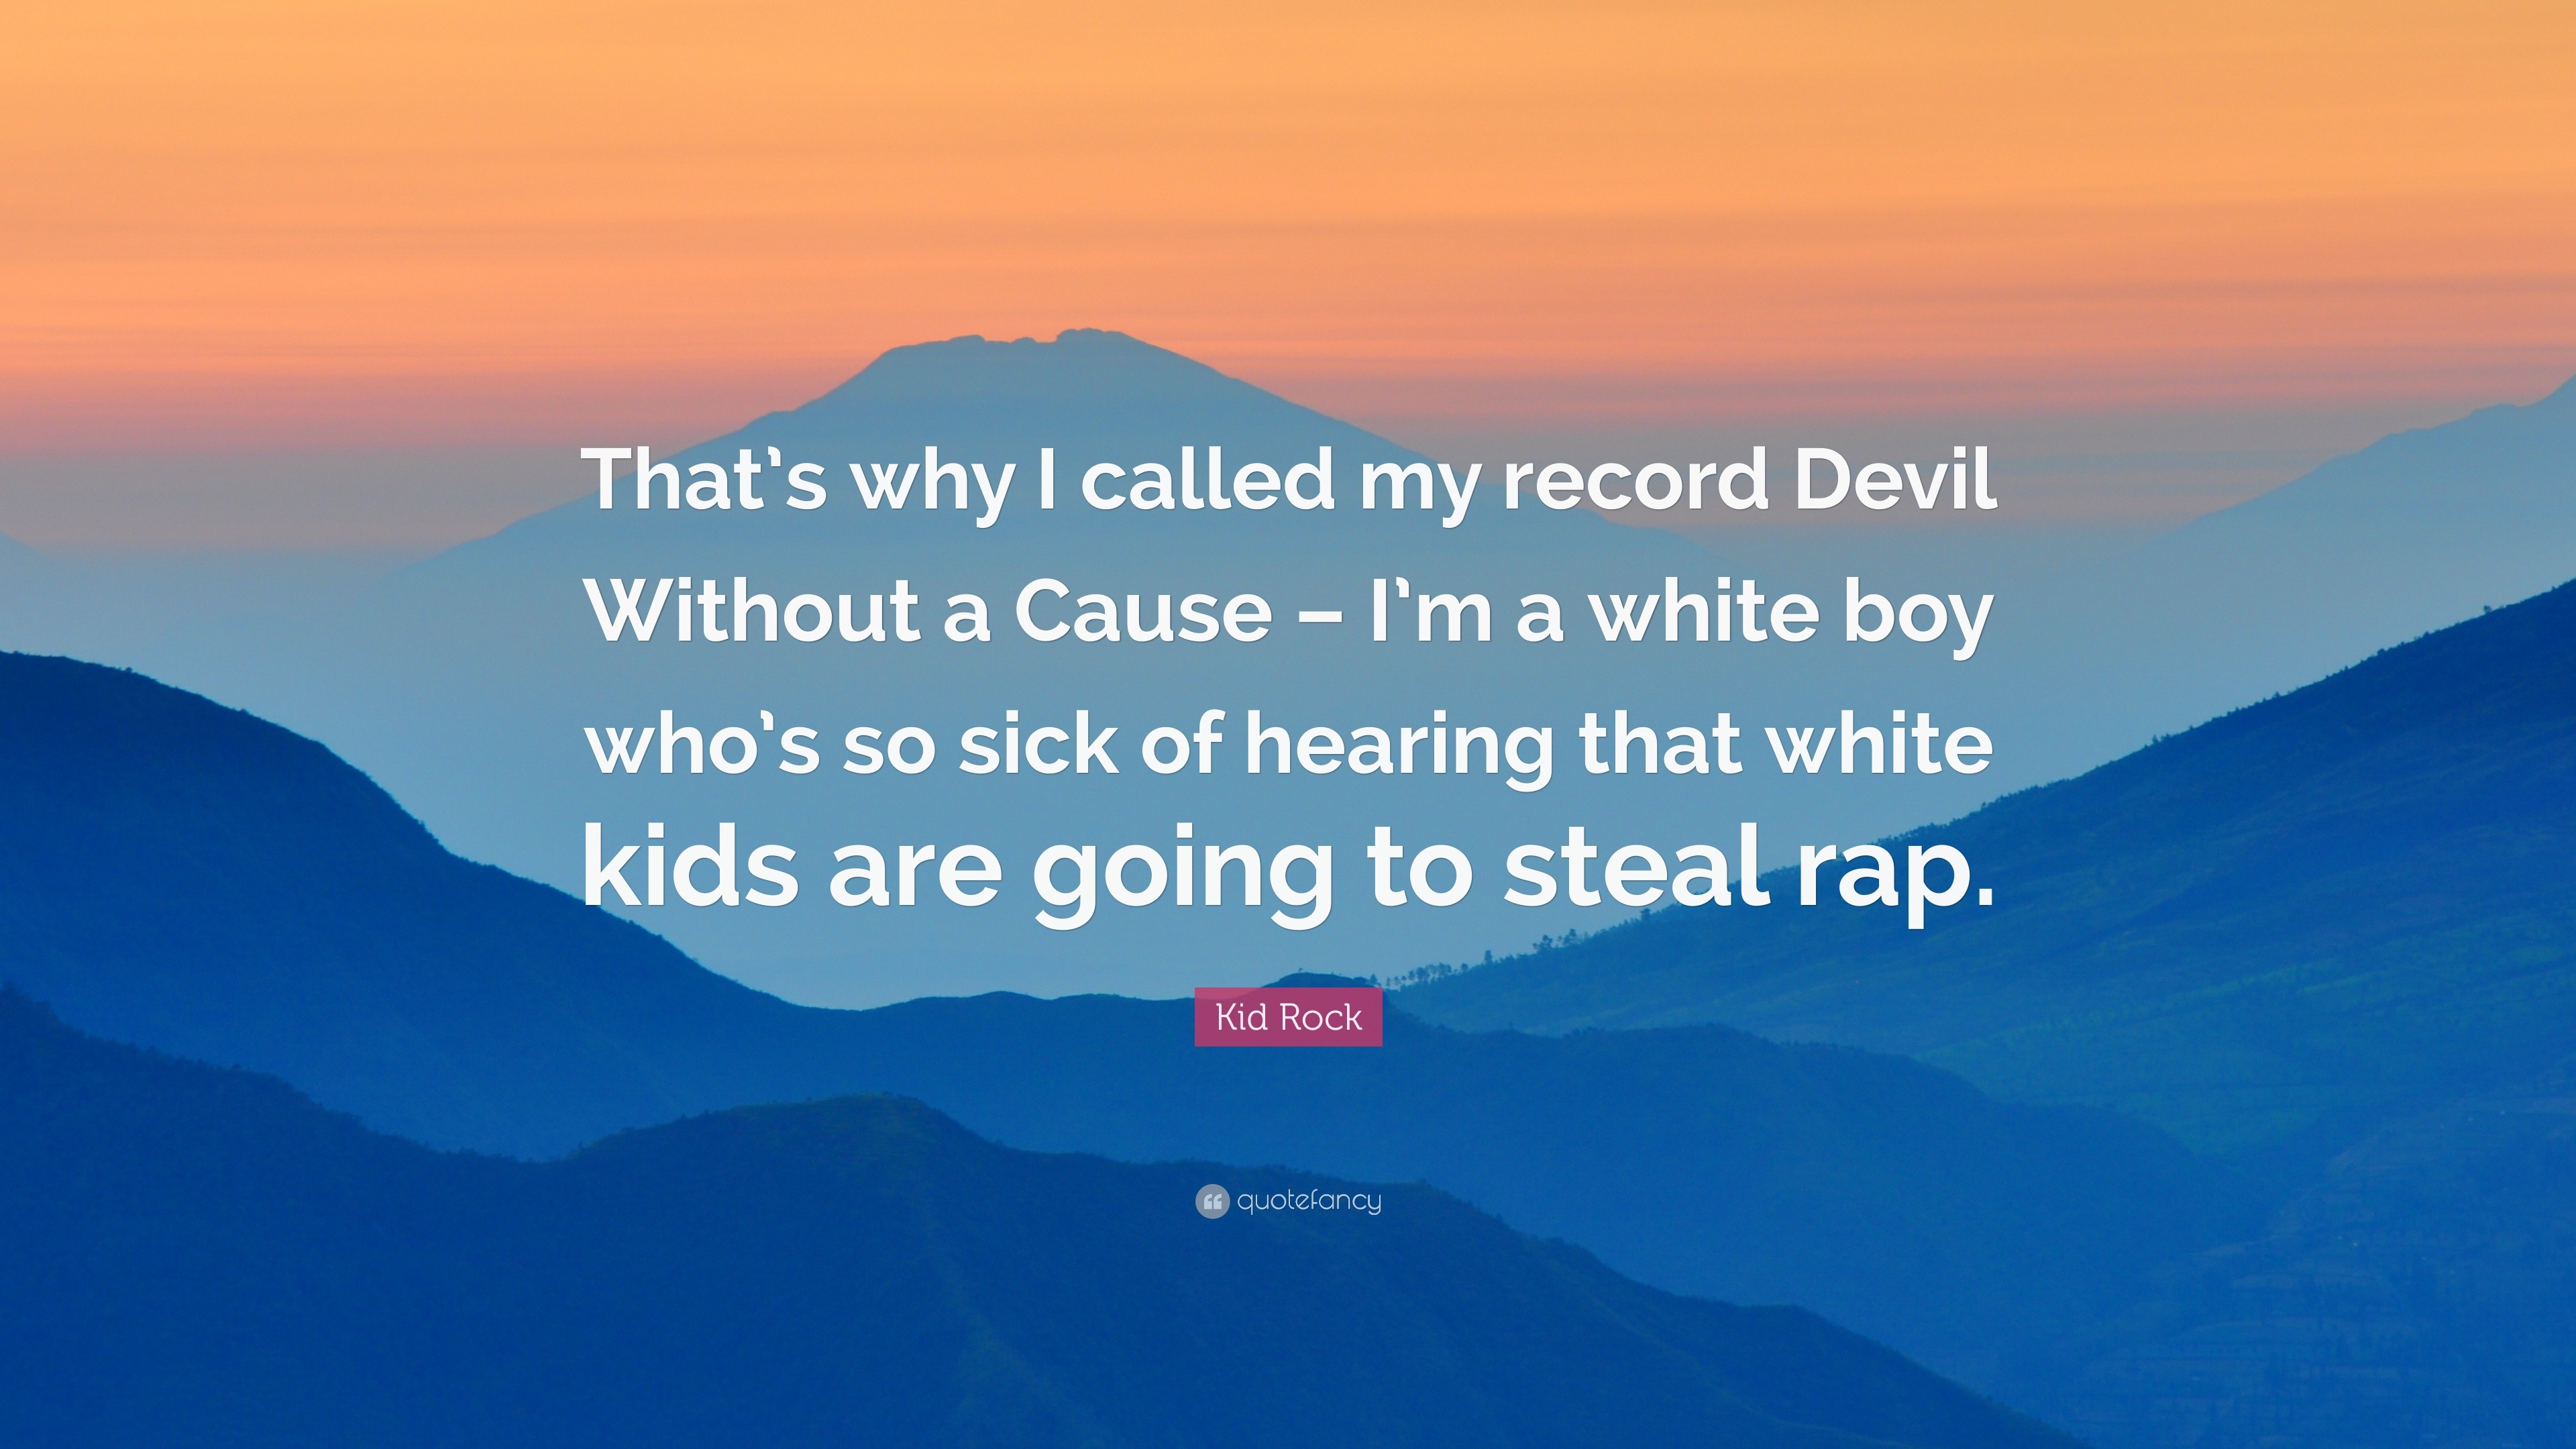 Kid Rock Quote: “That's why I called my record Devil Without a